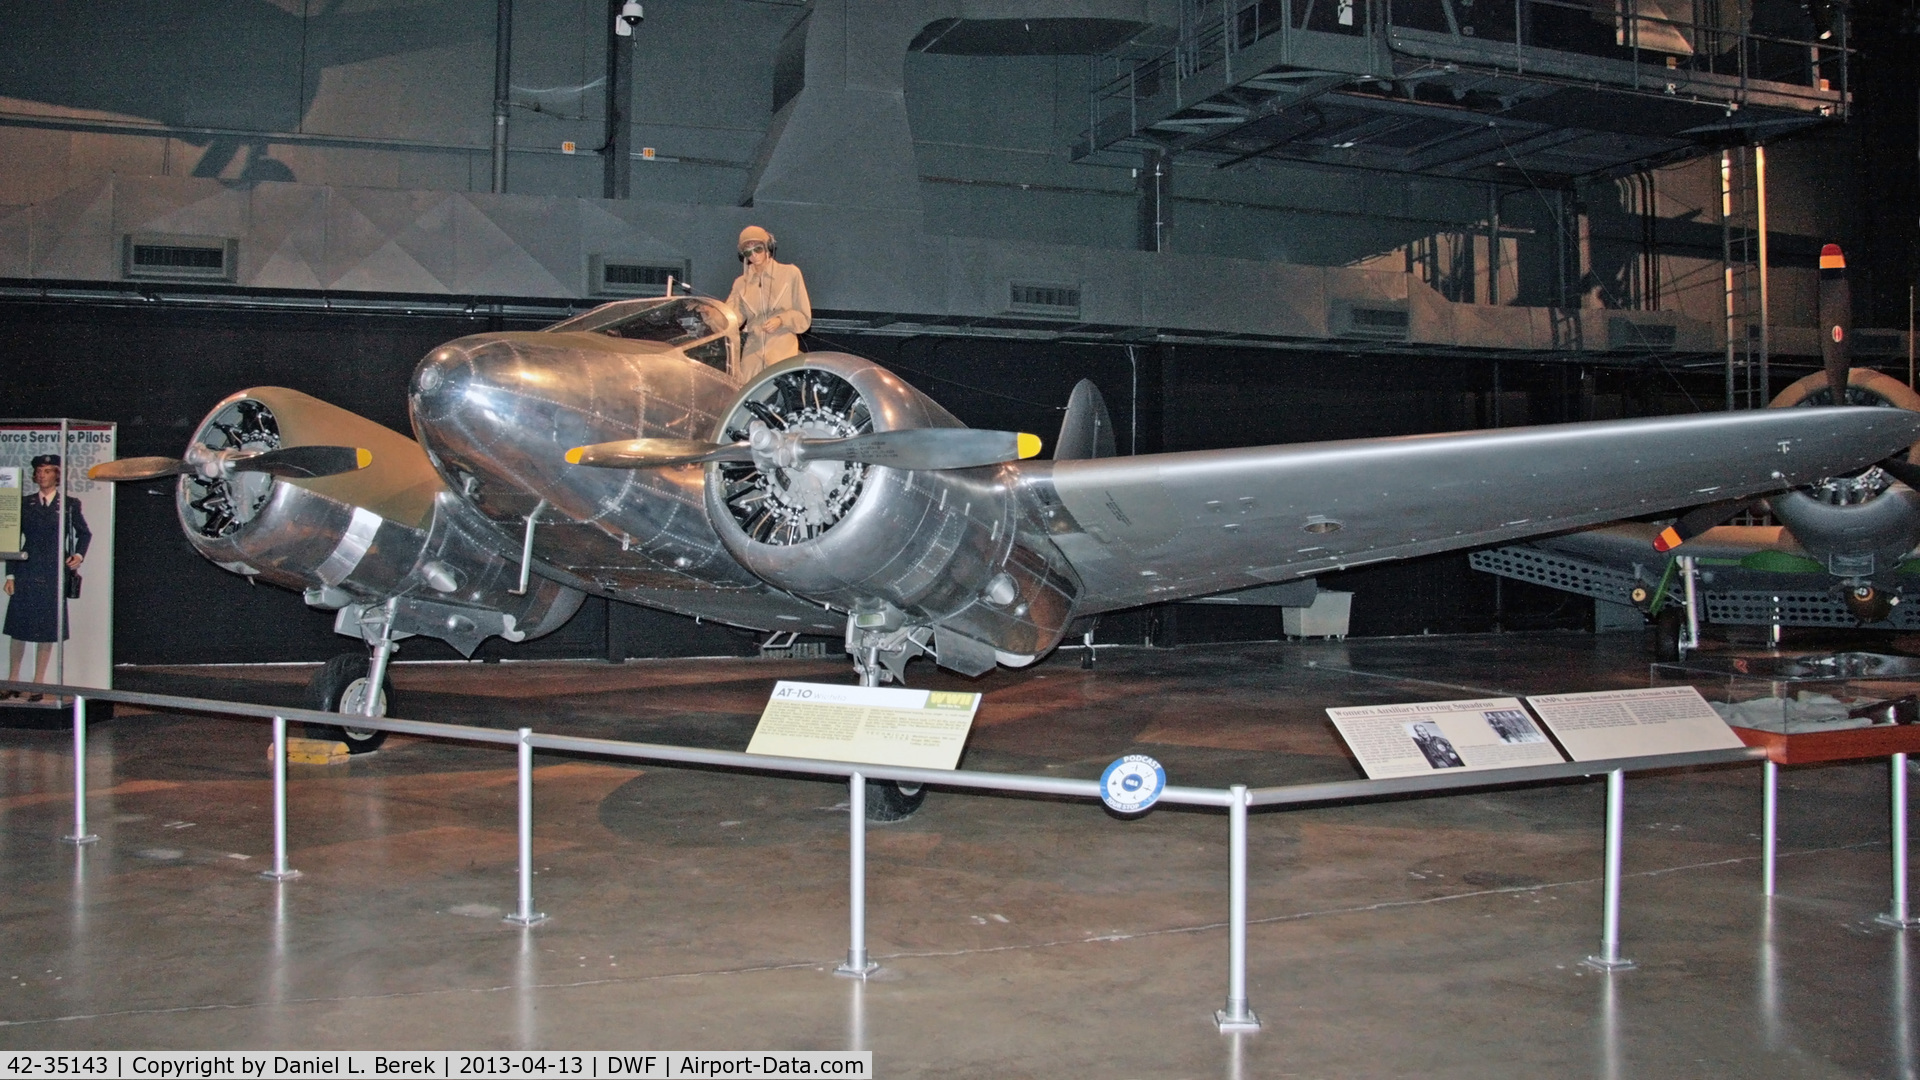 42-35143, 1942 Beech AT-10-GF C/N n/a, Early Beech twin, predecessor to the D18, on display in the World War II gallery, wearing fictitious markings 41-27193.